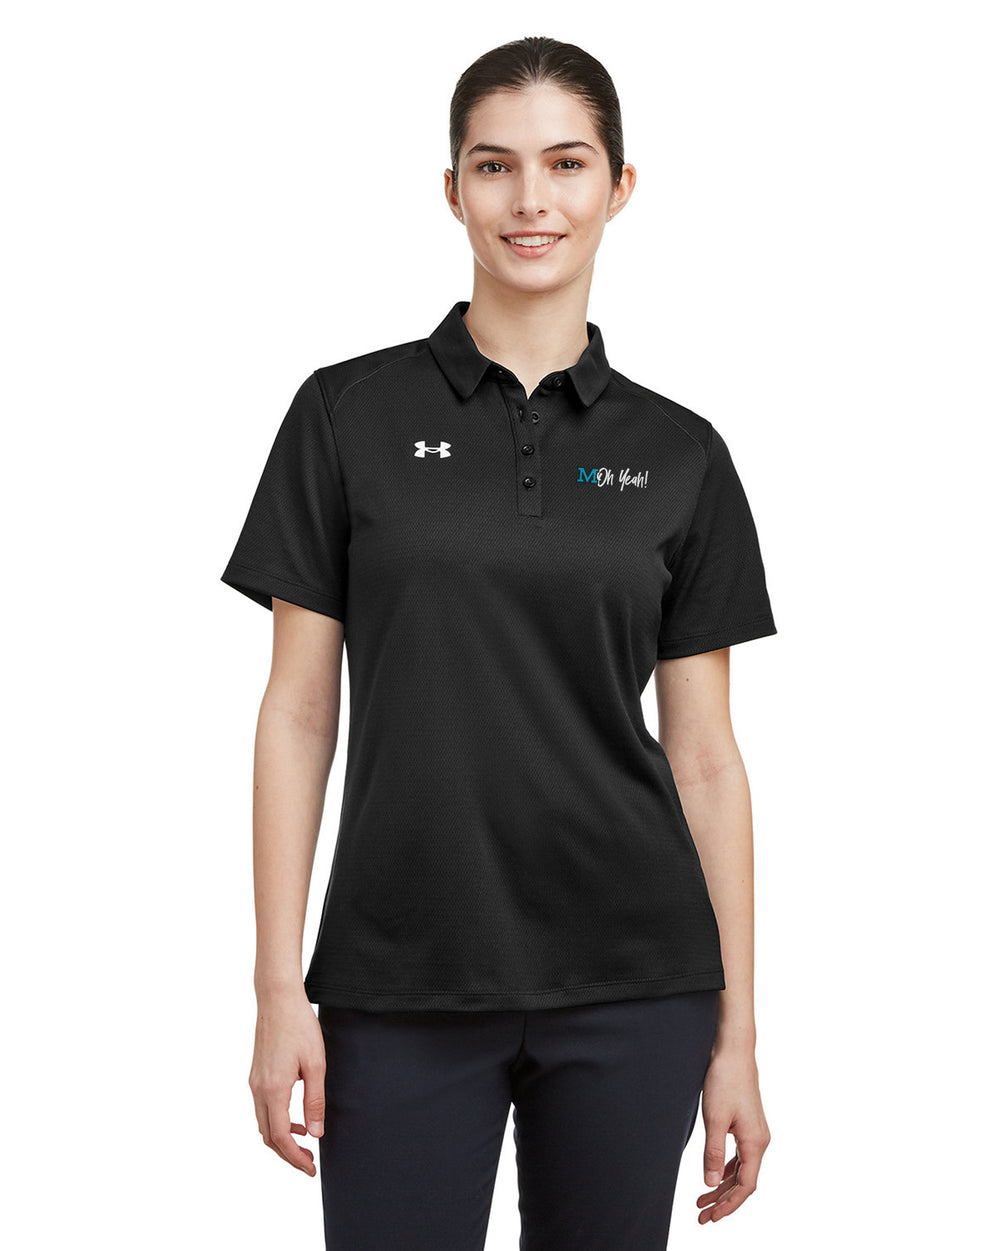 MOh Yeah - Under Armour Ladies' Tech Polo - 1370431